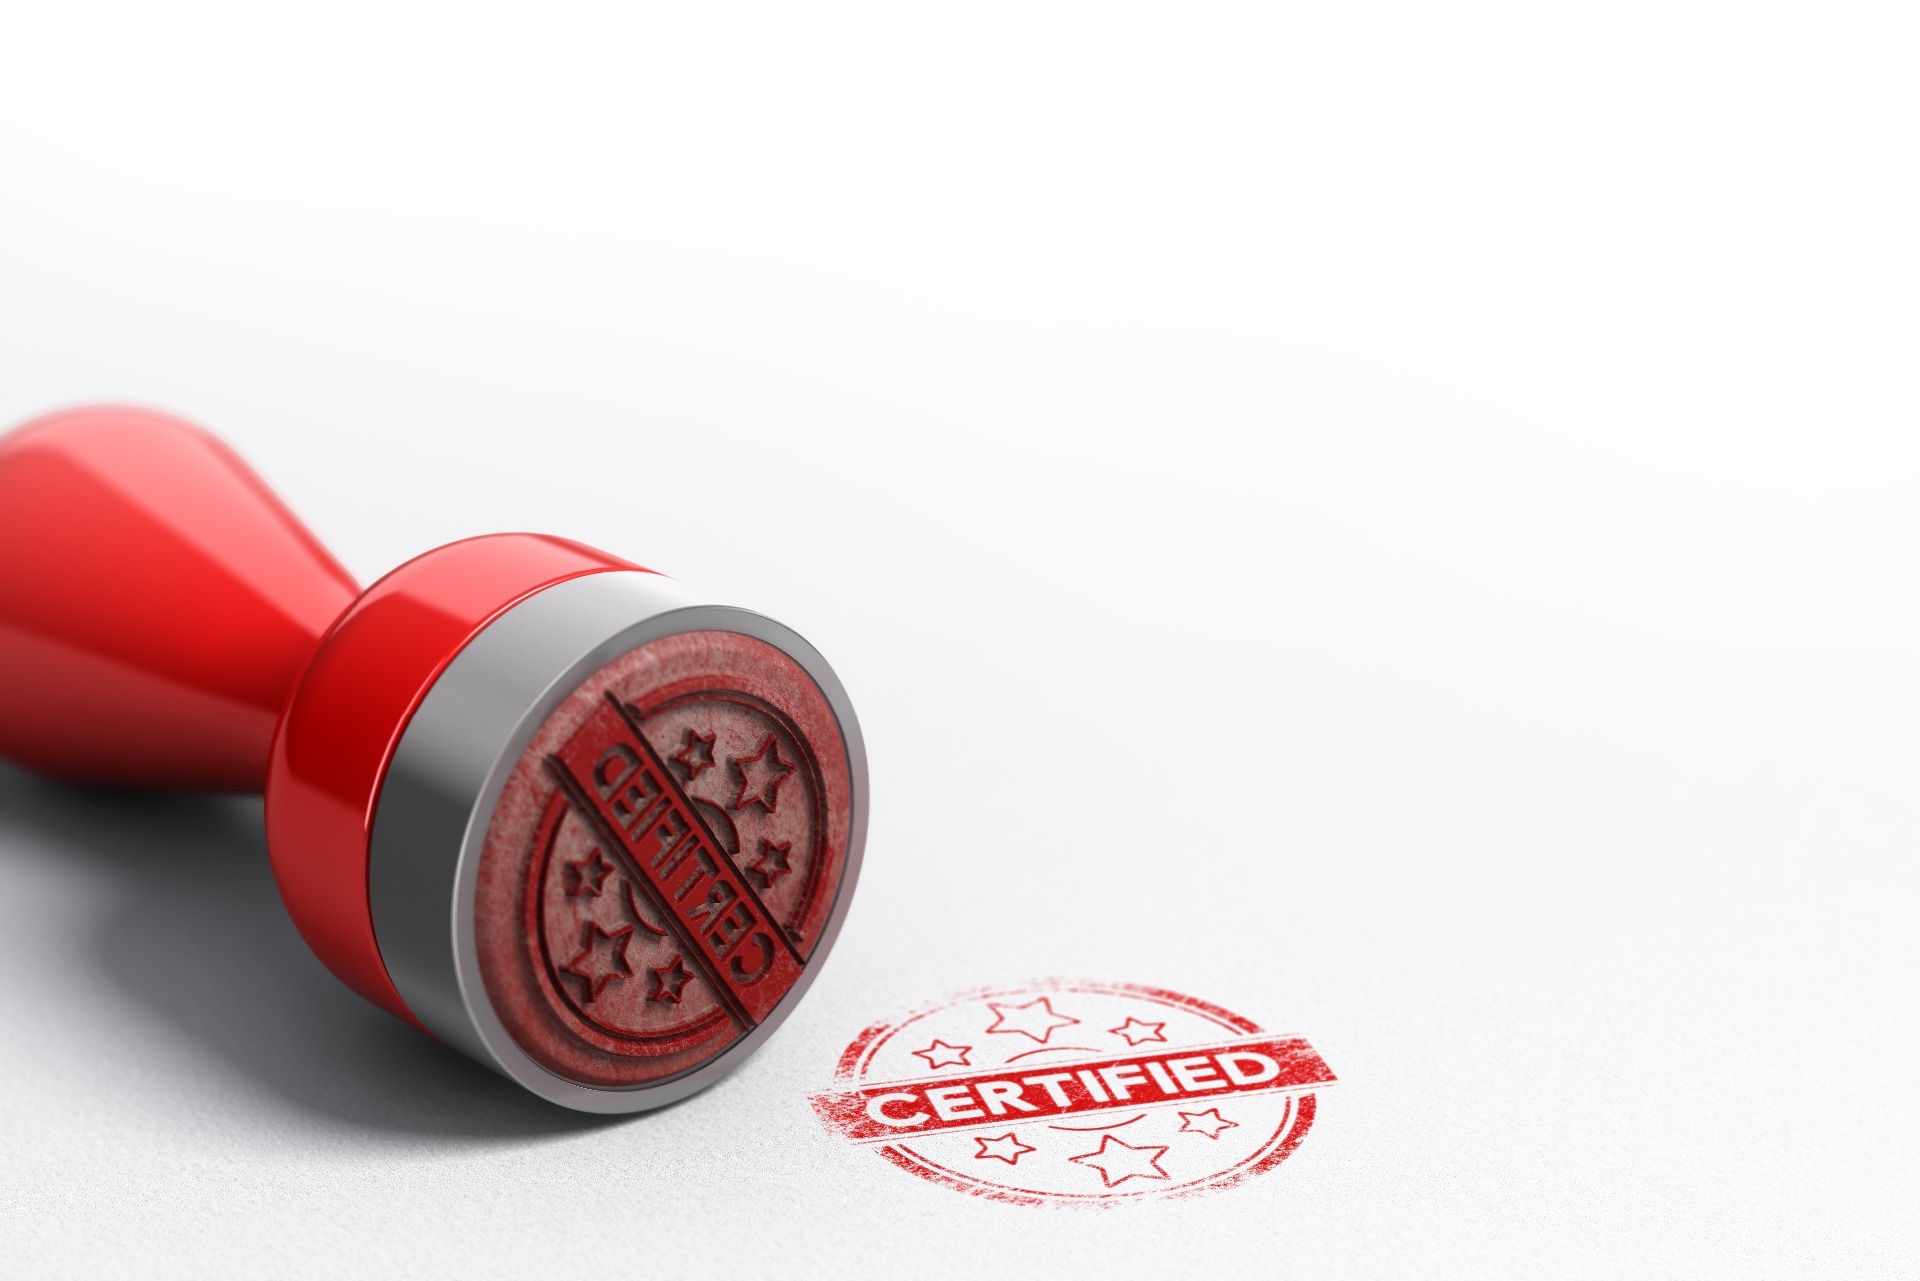 A stamp in red ink saying "Certified"; our Solicitors in Preston discuss the costs of certification.